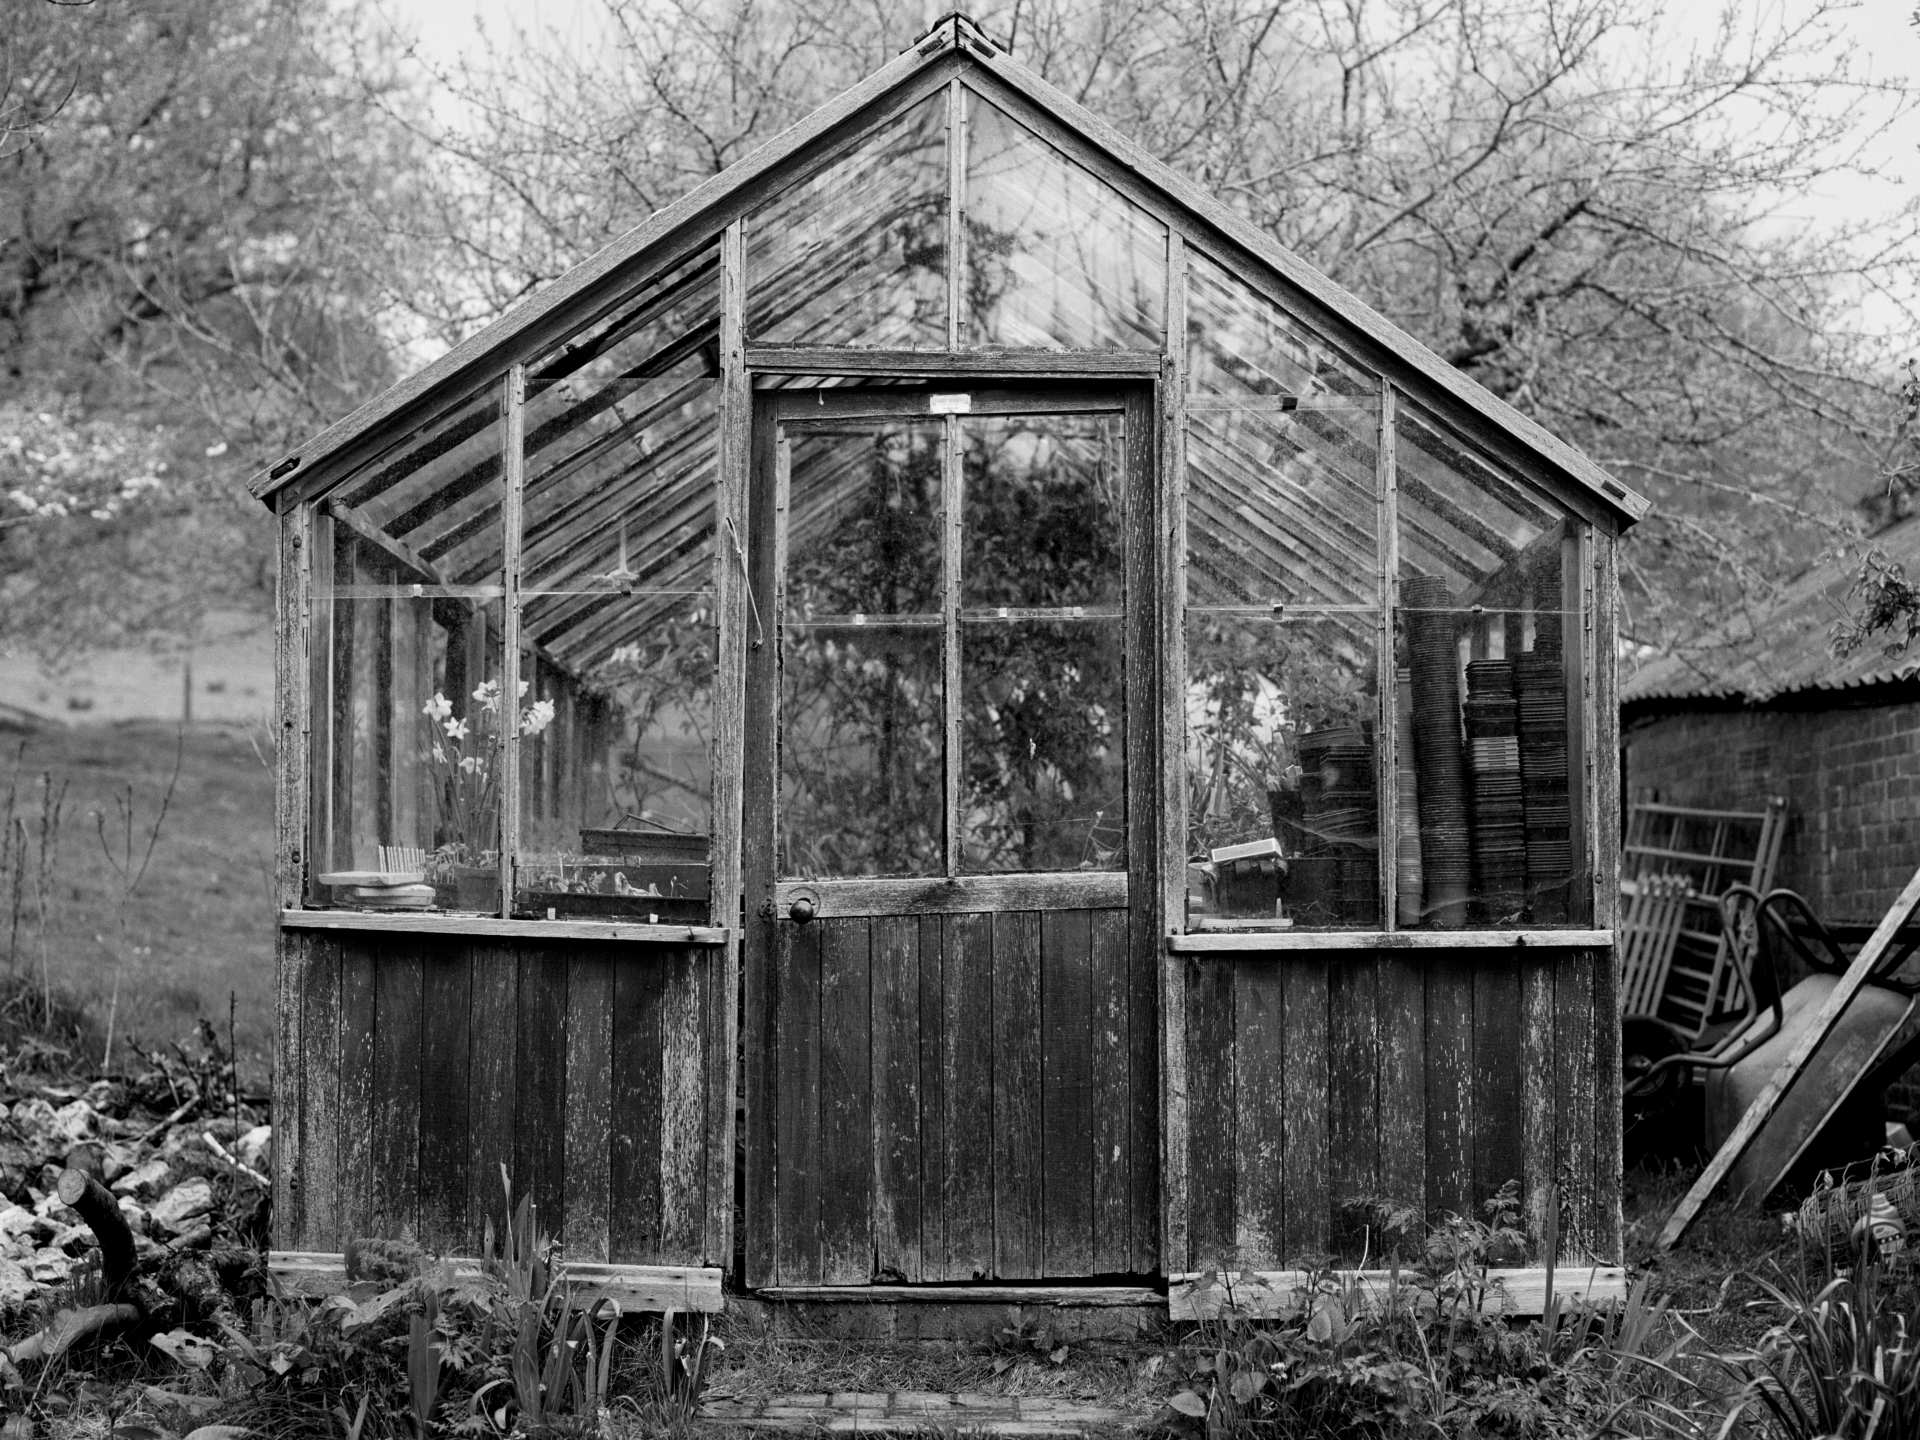 A greenhouse on the farm in Dorset